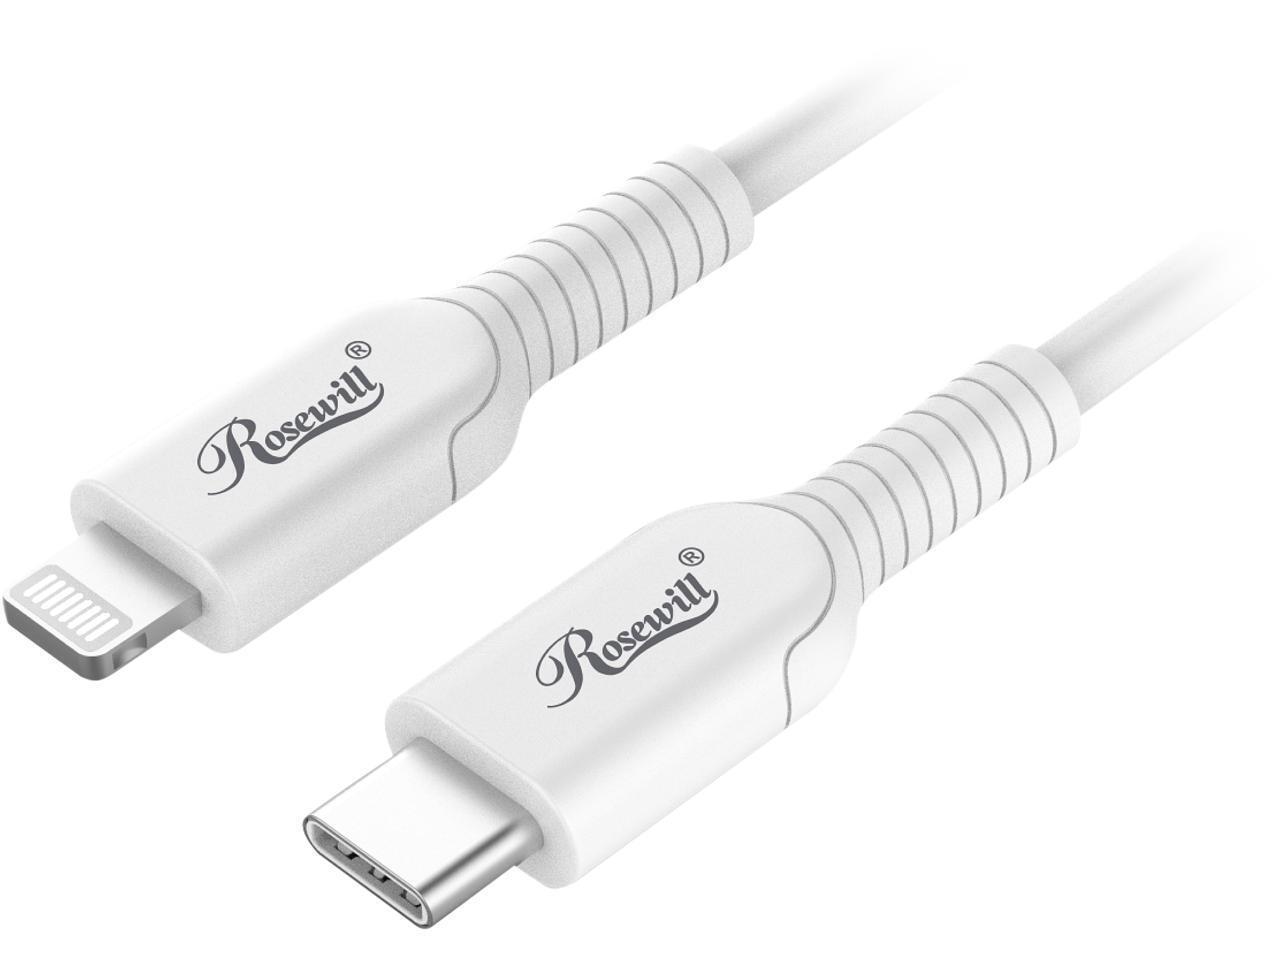 Rosewill iPhone Fast Charger Cable, USB-C to Lightning Cable, MFi Certified, for